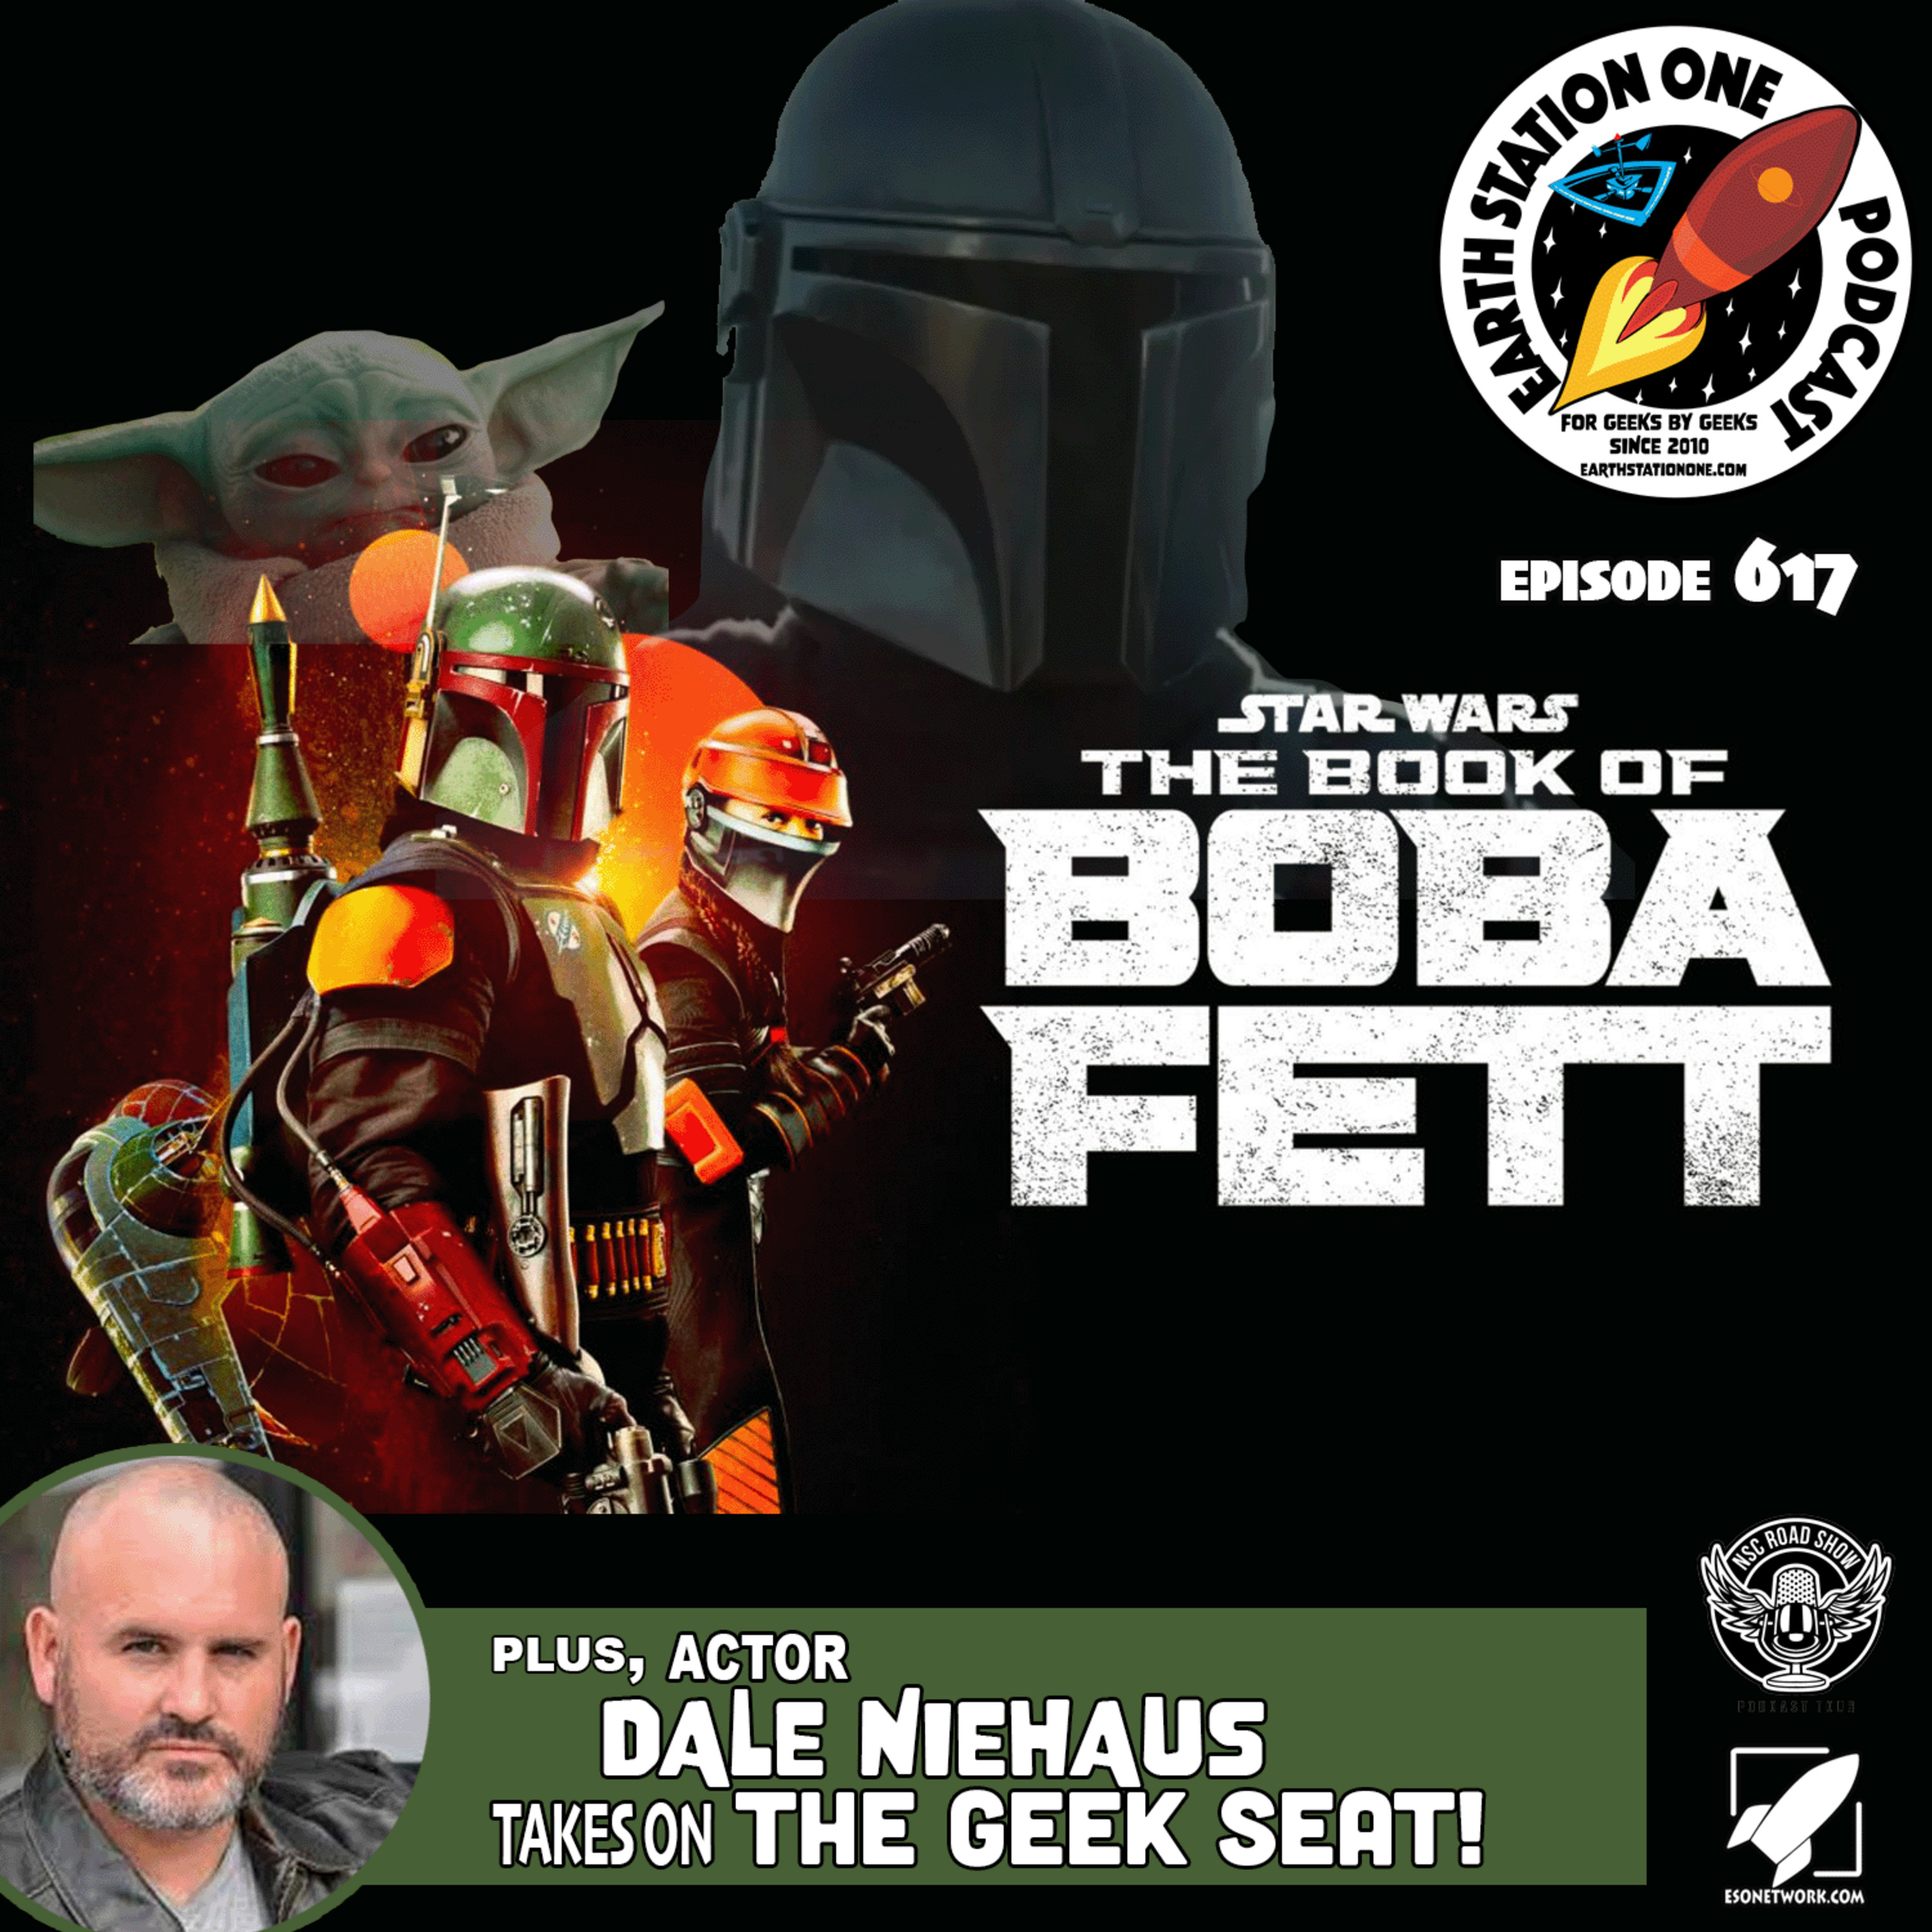 The Earth Station One Podcast - The Book Of Boba Fett Series Review